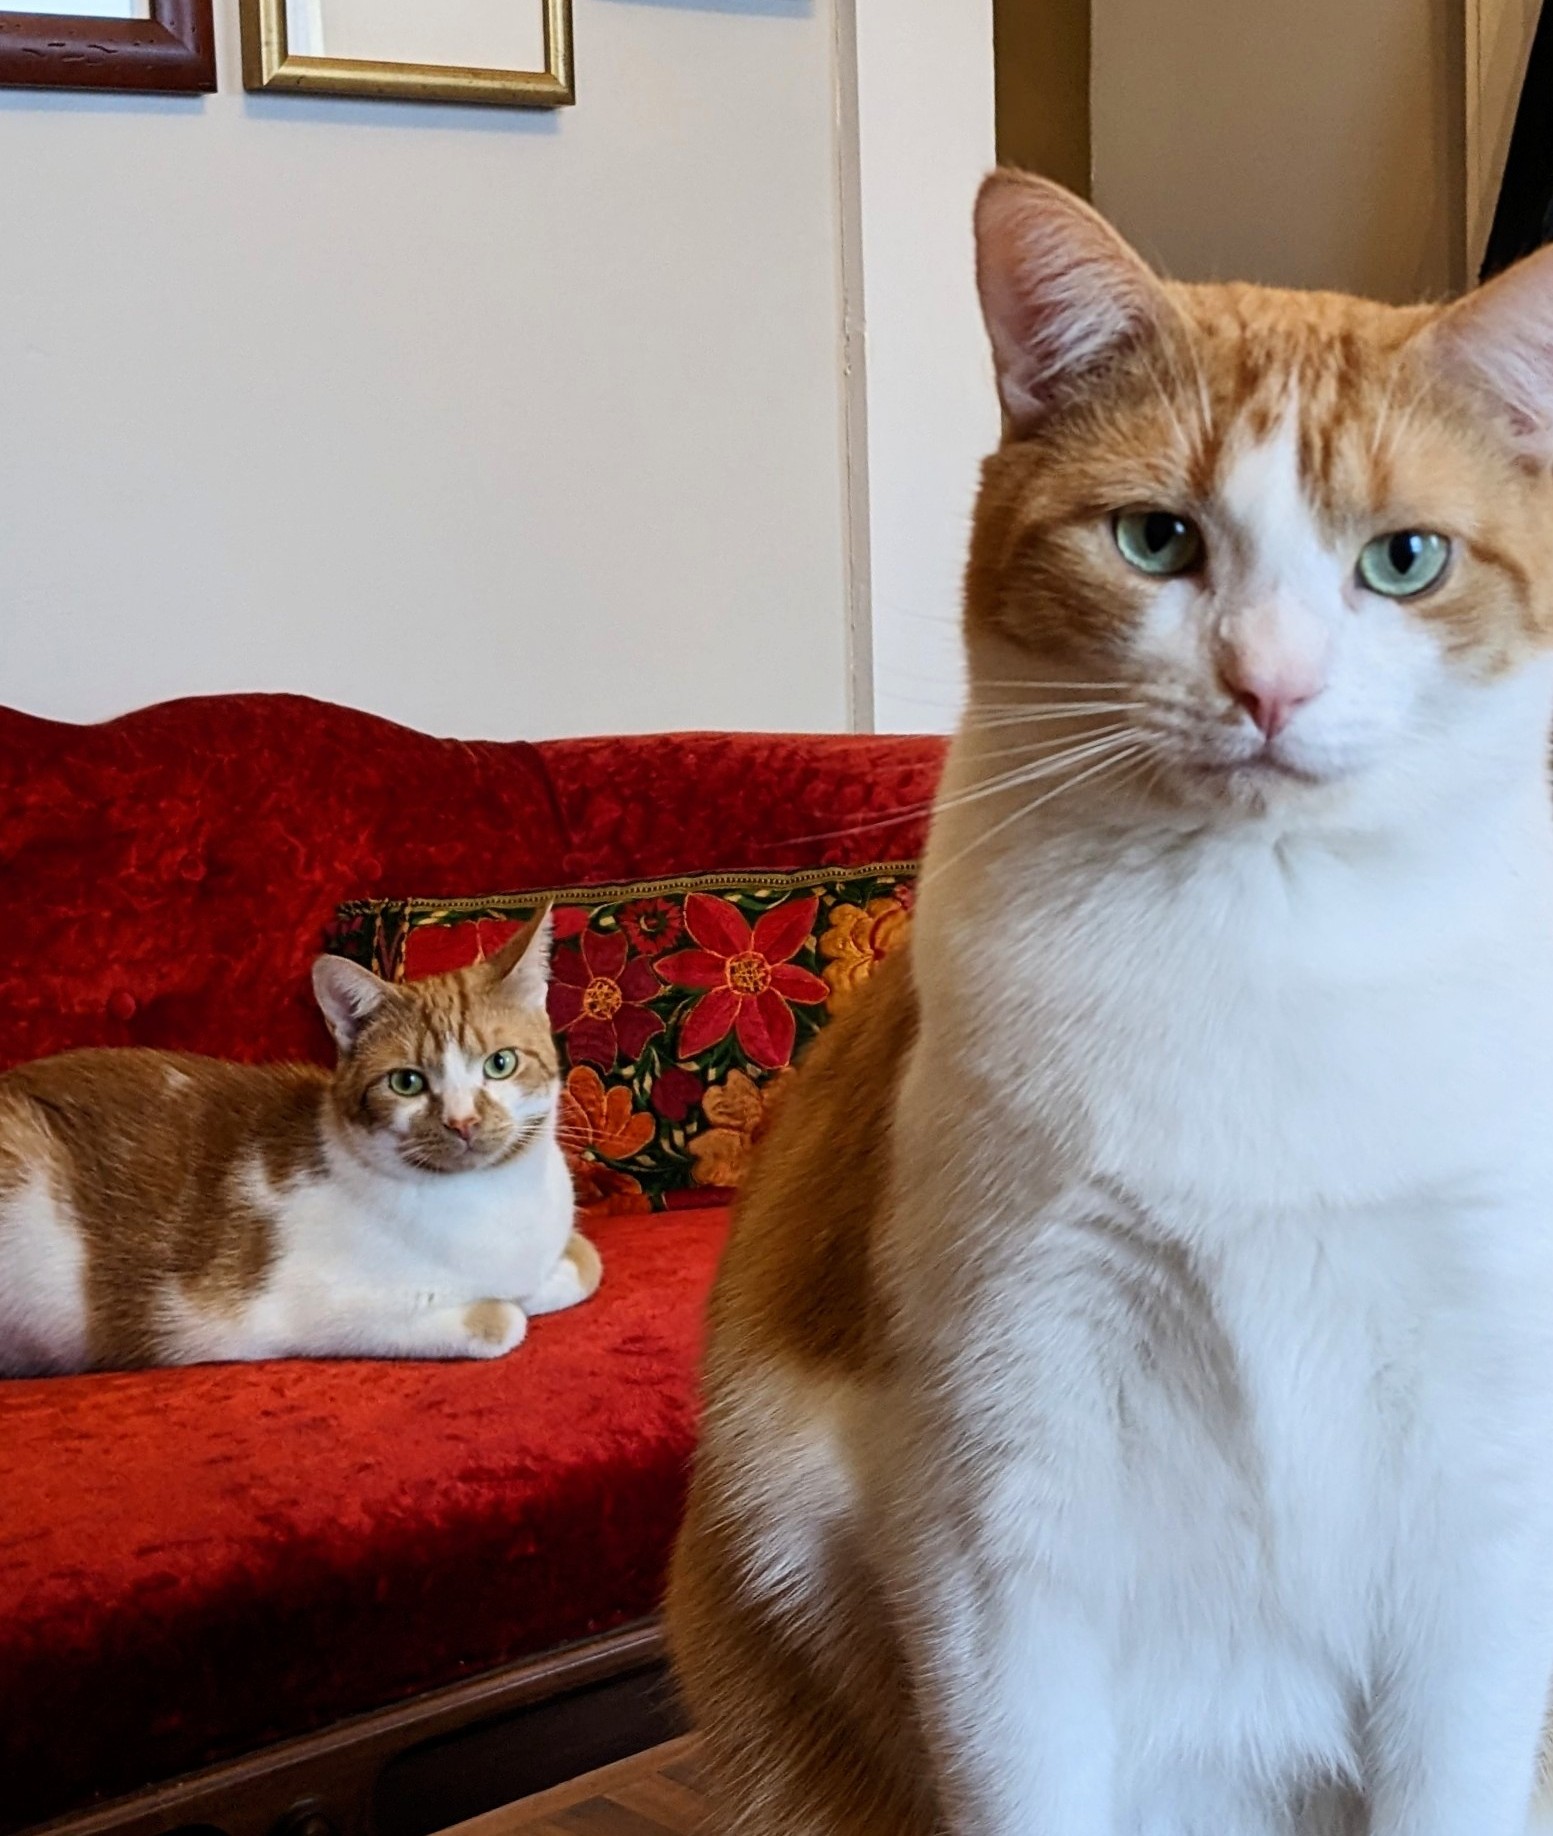 An orange and white cat in the foreground and another on a chaise behind him.